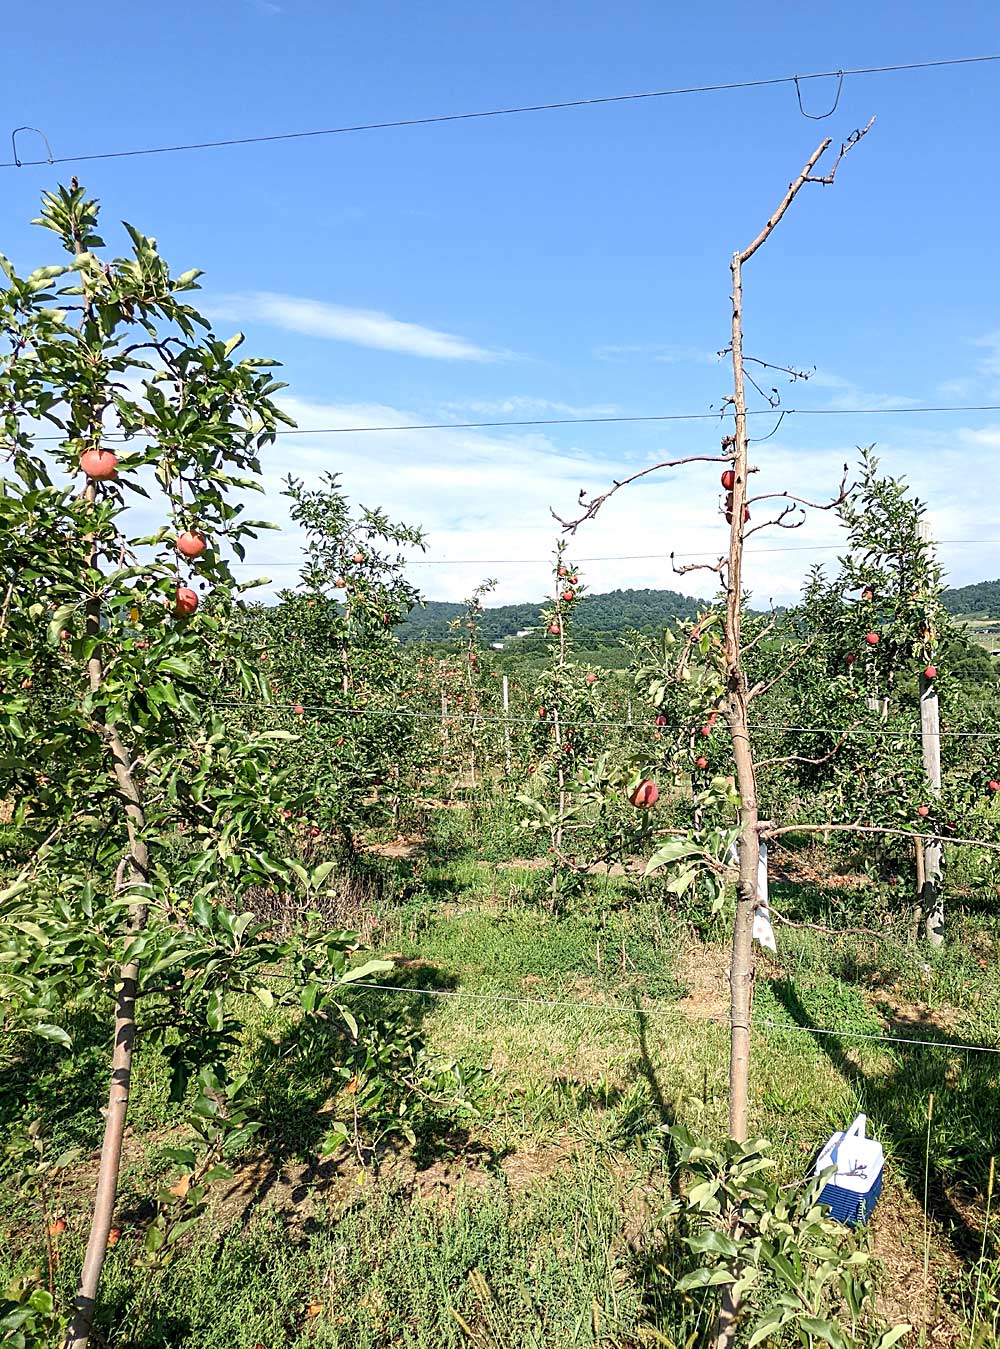 Rapid apple decline, seen here in a 2022 photo of an Adams County, Pennsylvania orchard, is a research priority for another new scientist at the Appalachian Fruit Research Station, pathologist Tami Collum. (Courtesy USDA Agricultural Research Service)